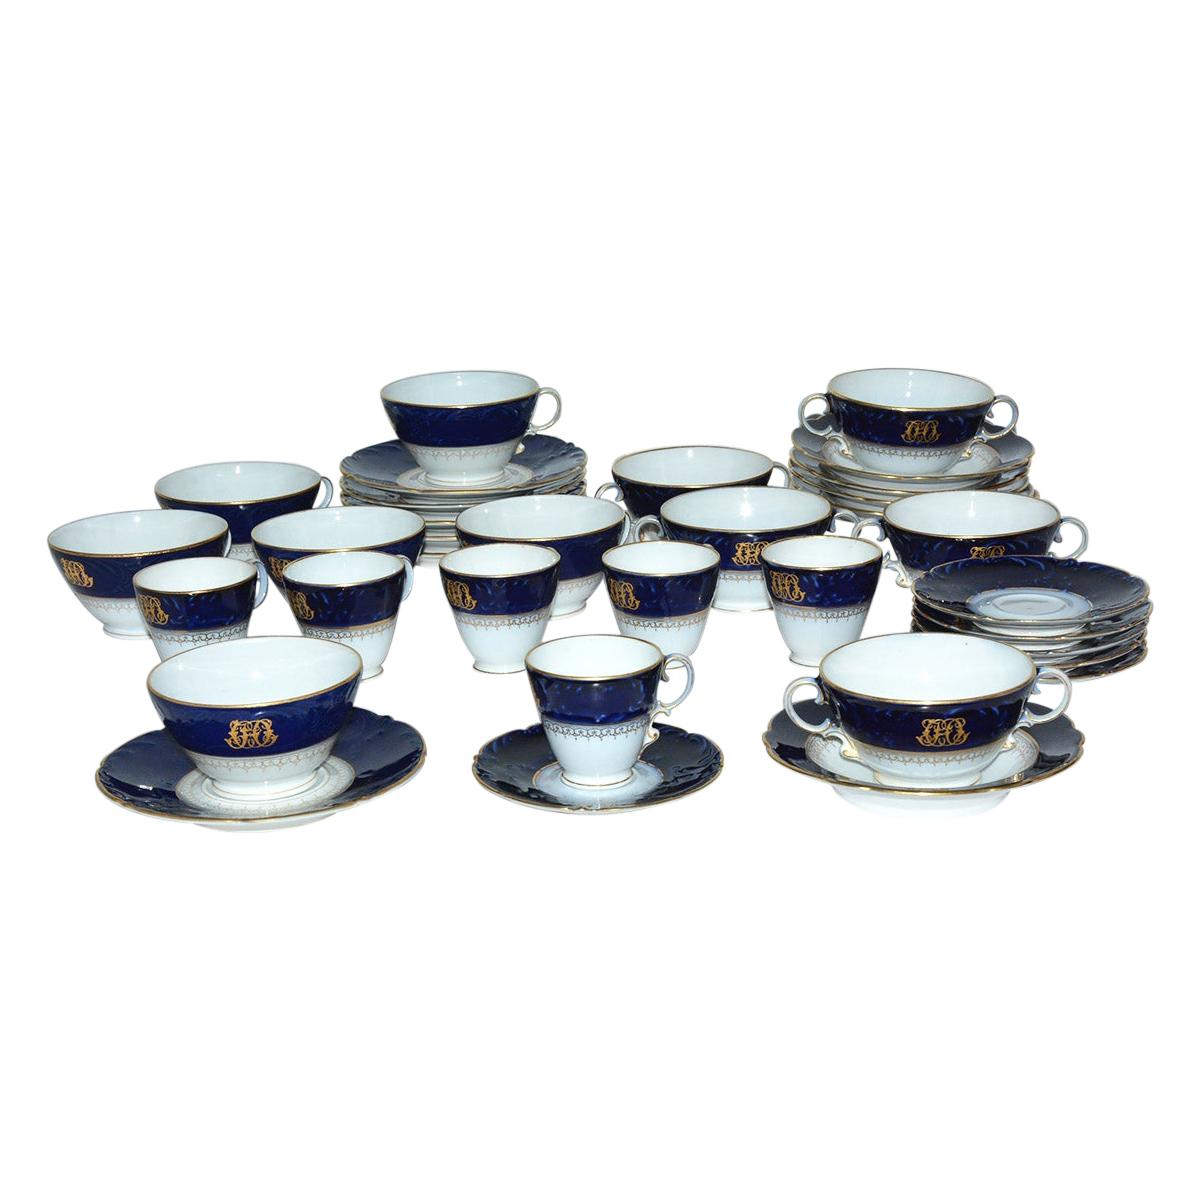 Set of Mid-19th Century Cobalt Blue and White Porcelain, China